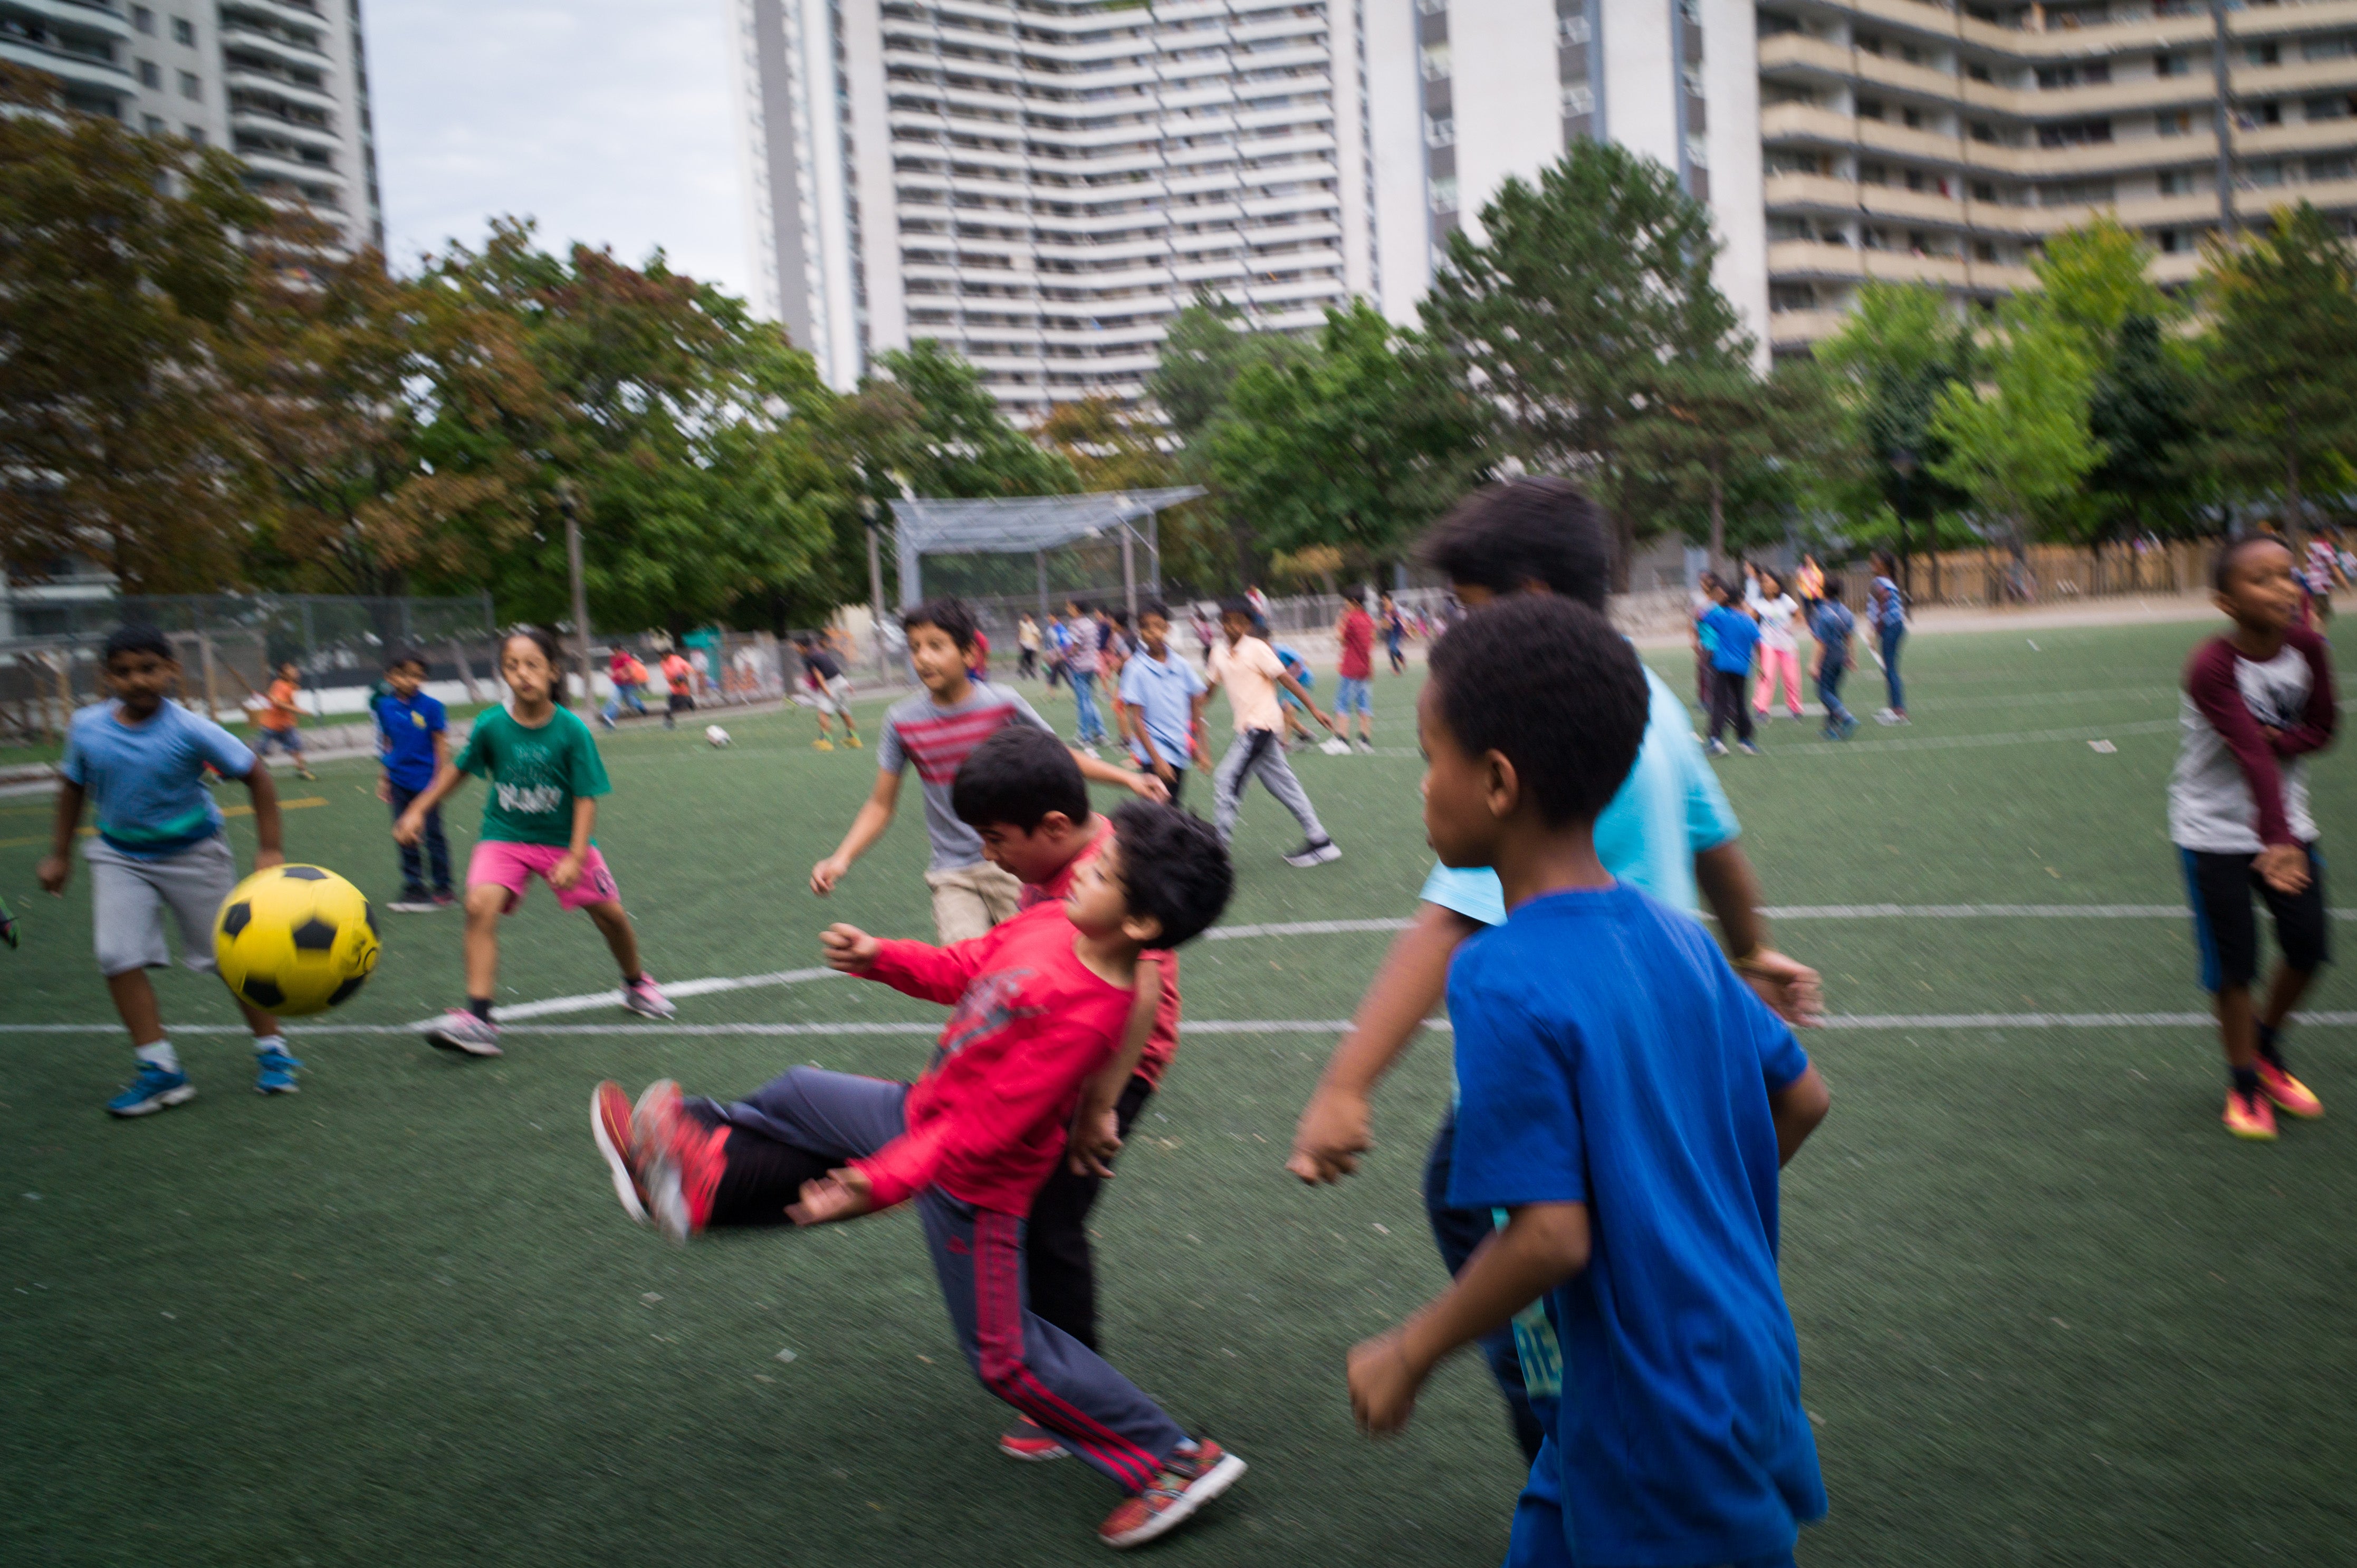 Students play soccer during recess, at Rose Avenue Public School in Toronto, Ontario, Canada. (Ian Willms/For Keystone Crossroads)